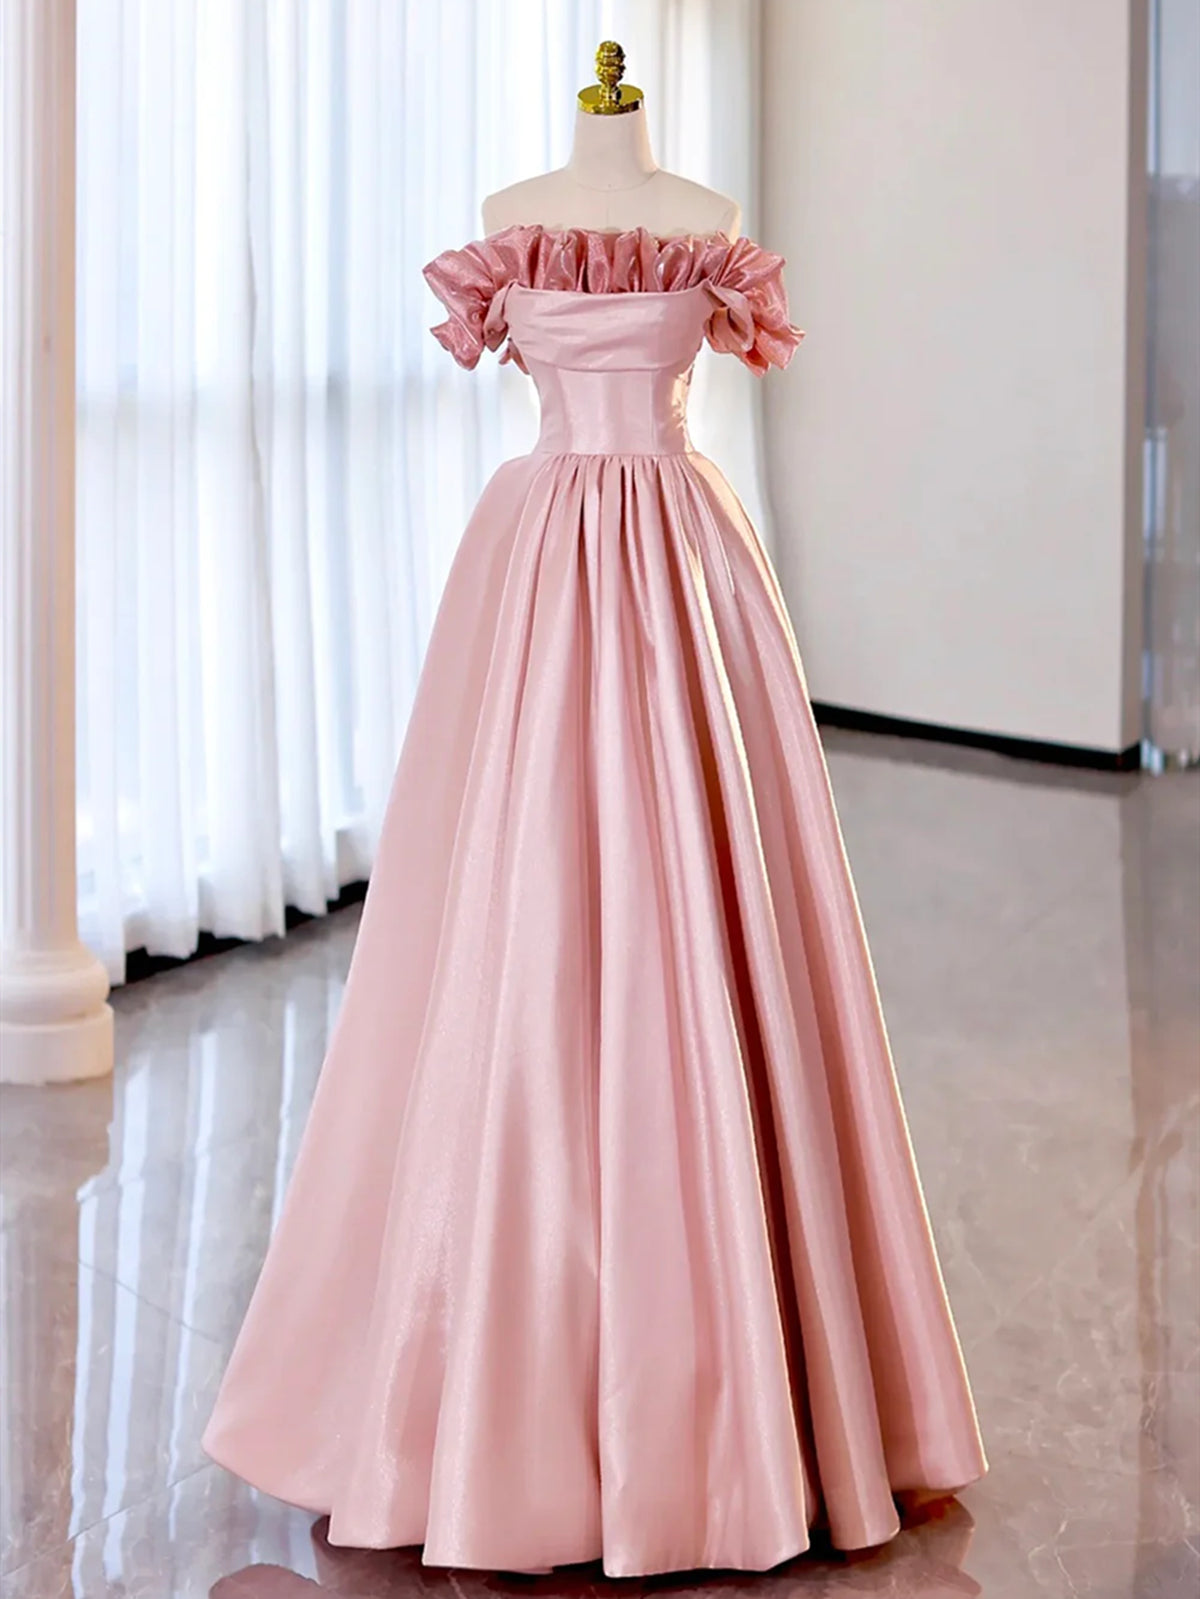 Party Dress Patterns, Red Pink Satin Long Prom Dresses, Red Pink Satin Long Formal Evening Dresses